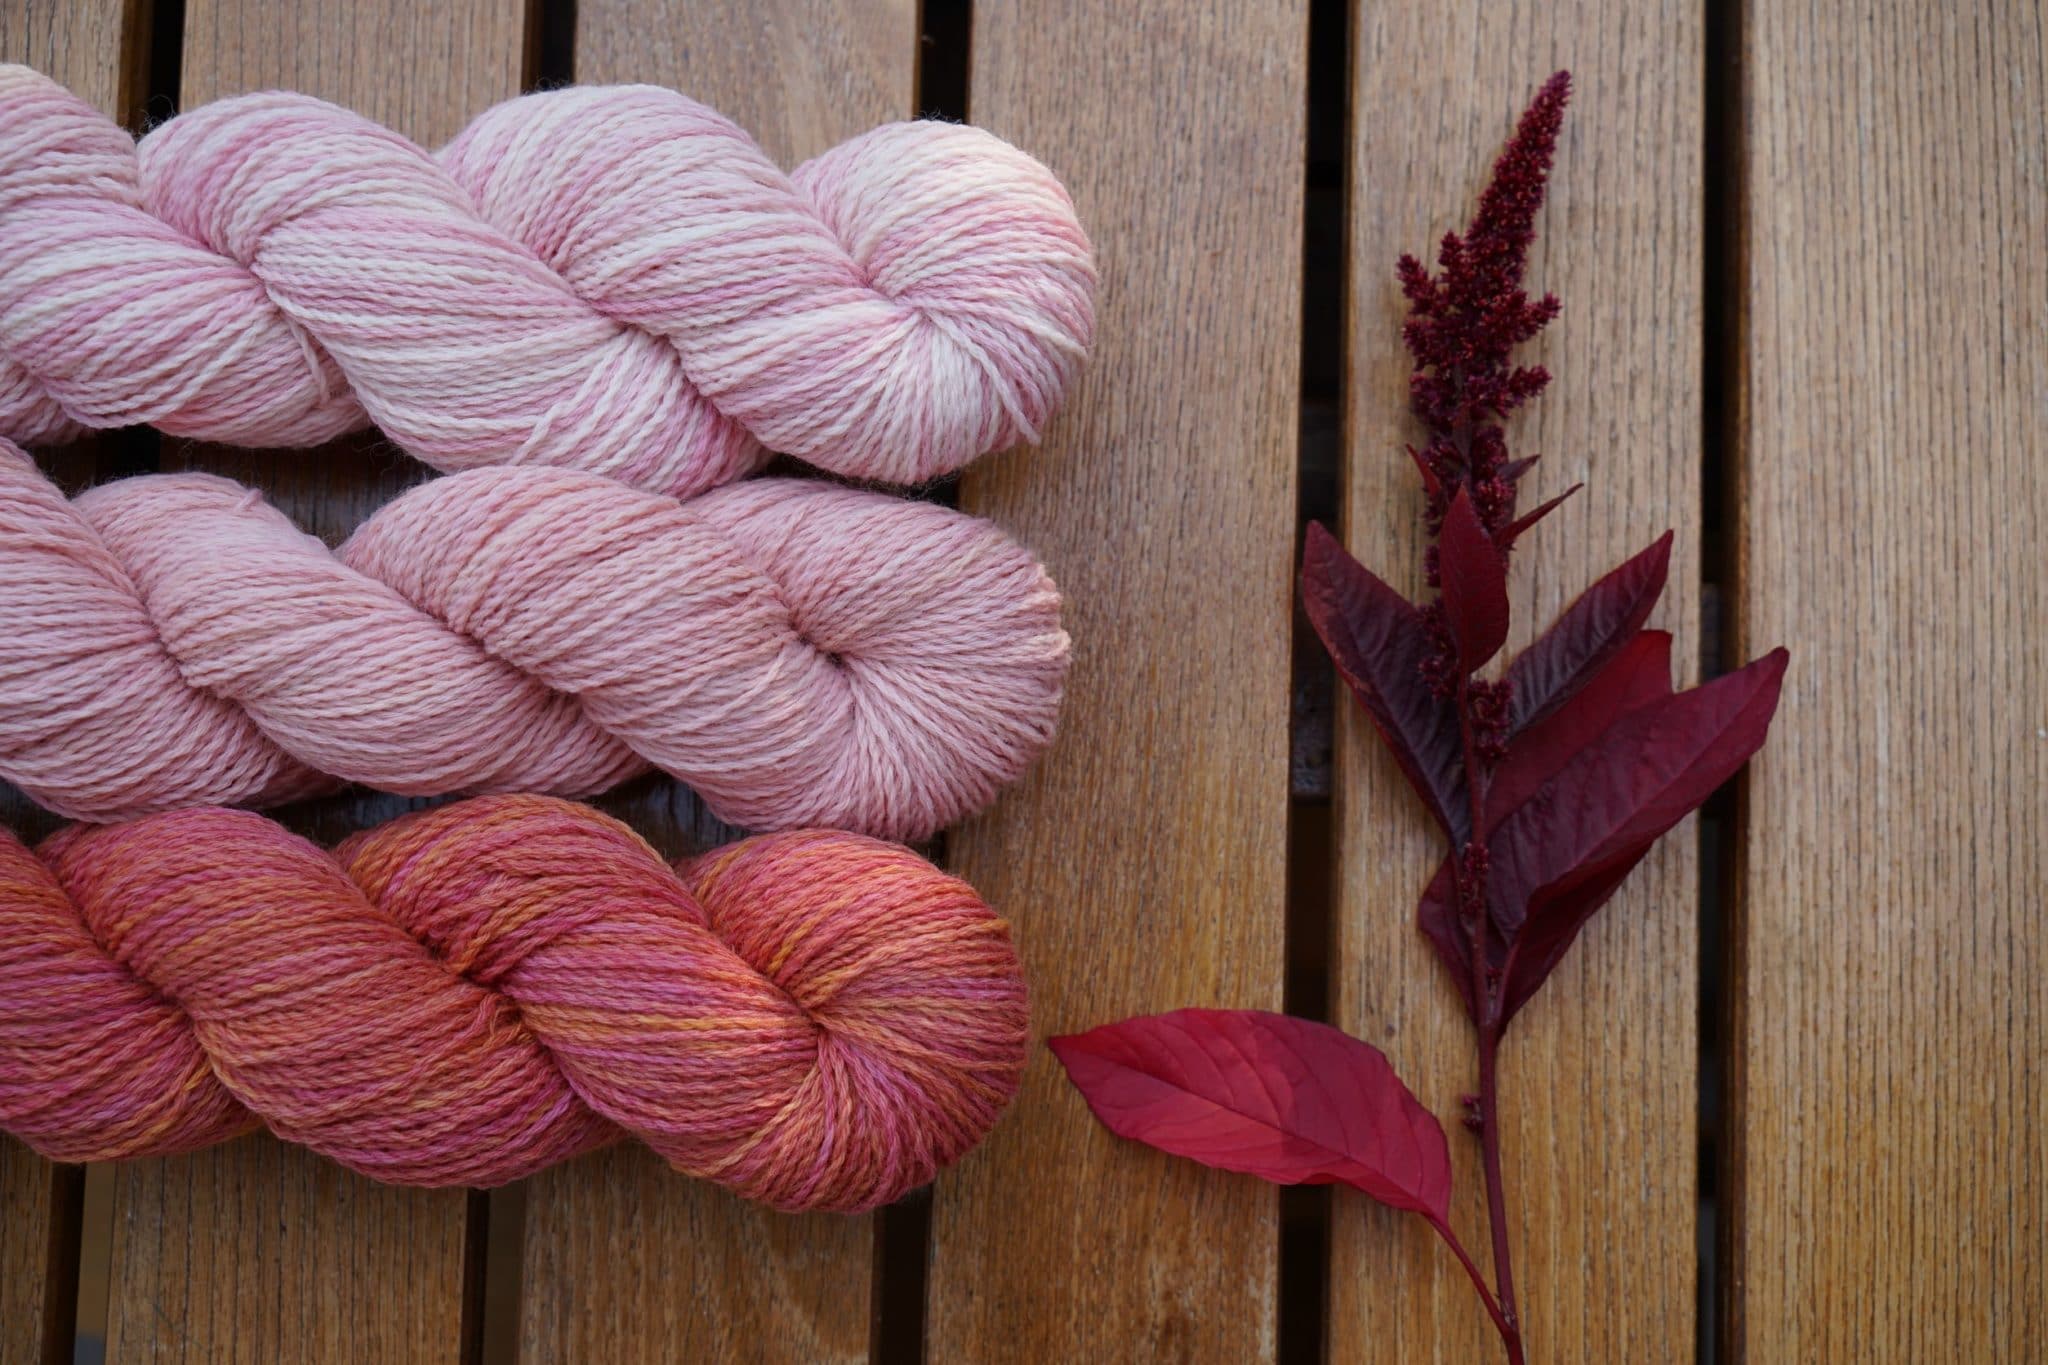 Natural Dyeing With Amaranth - Rosemary And Pines Fiber Arts